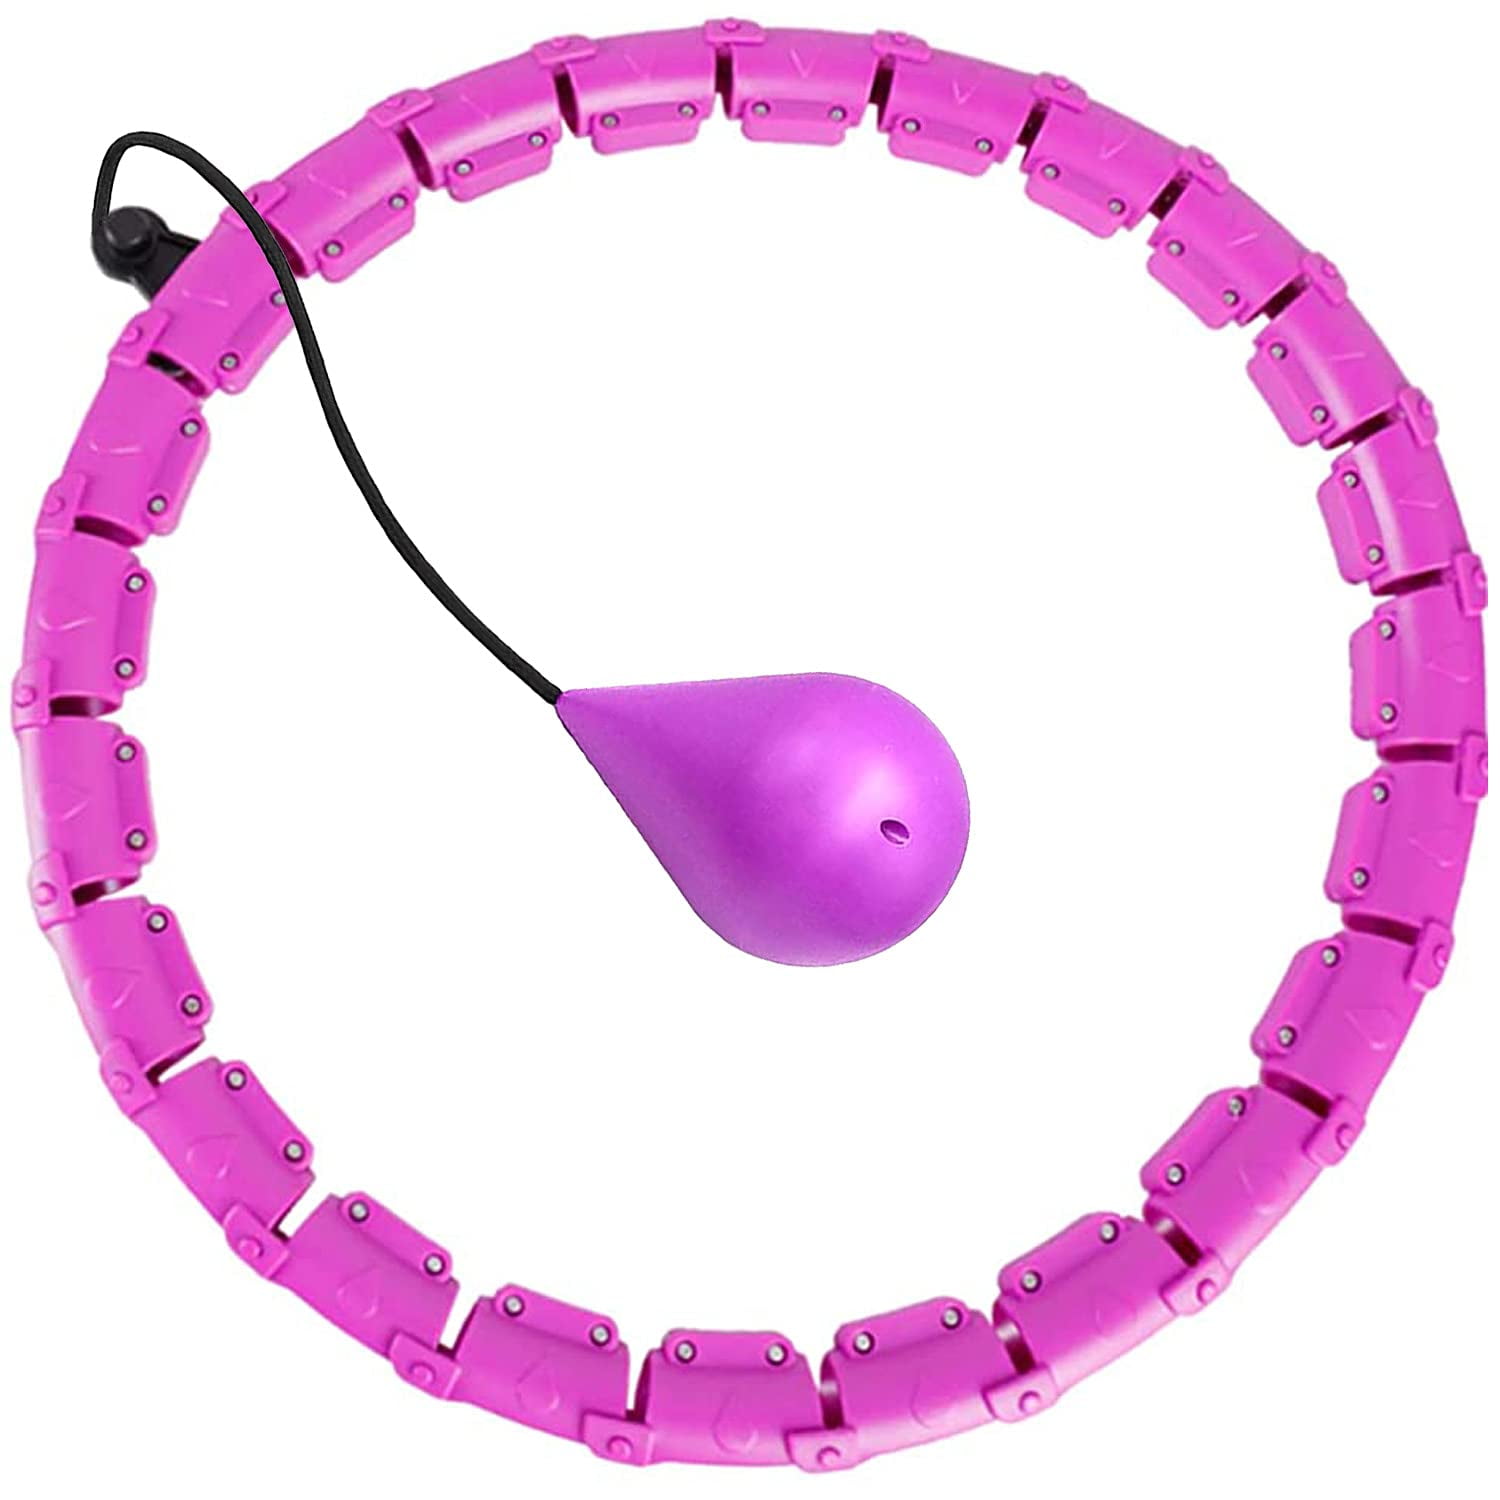 Smart Weighted Hoola Hoops 24 Sections Detachable 360 Degree 2 in 1 Abdomen Fitness Massage Hoola Hoop for Kids Adults Weight Loss